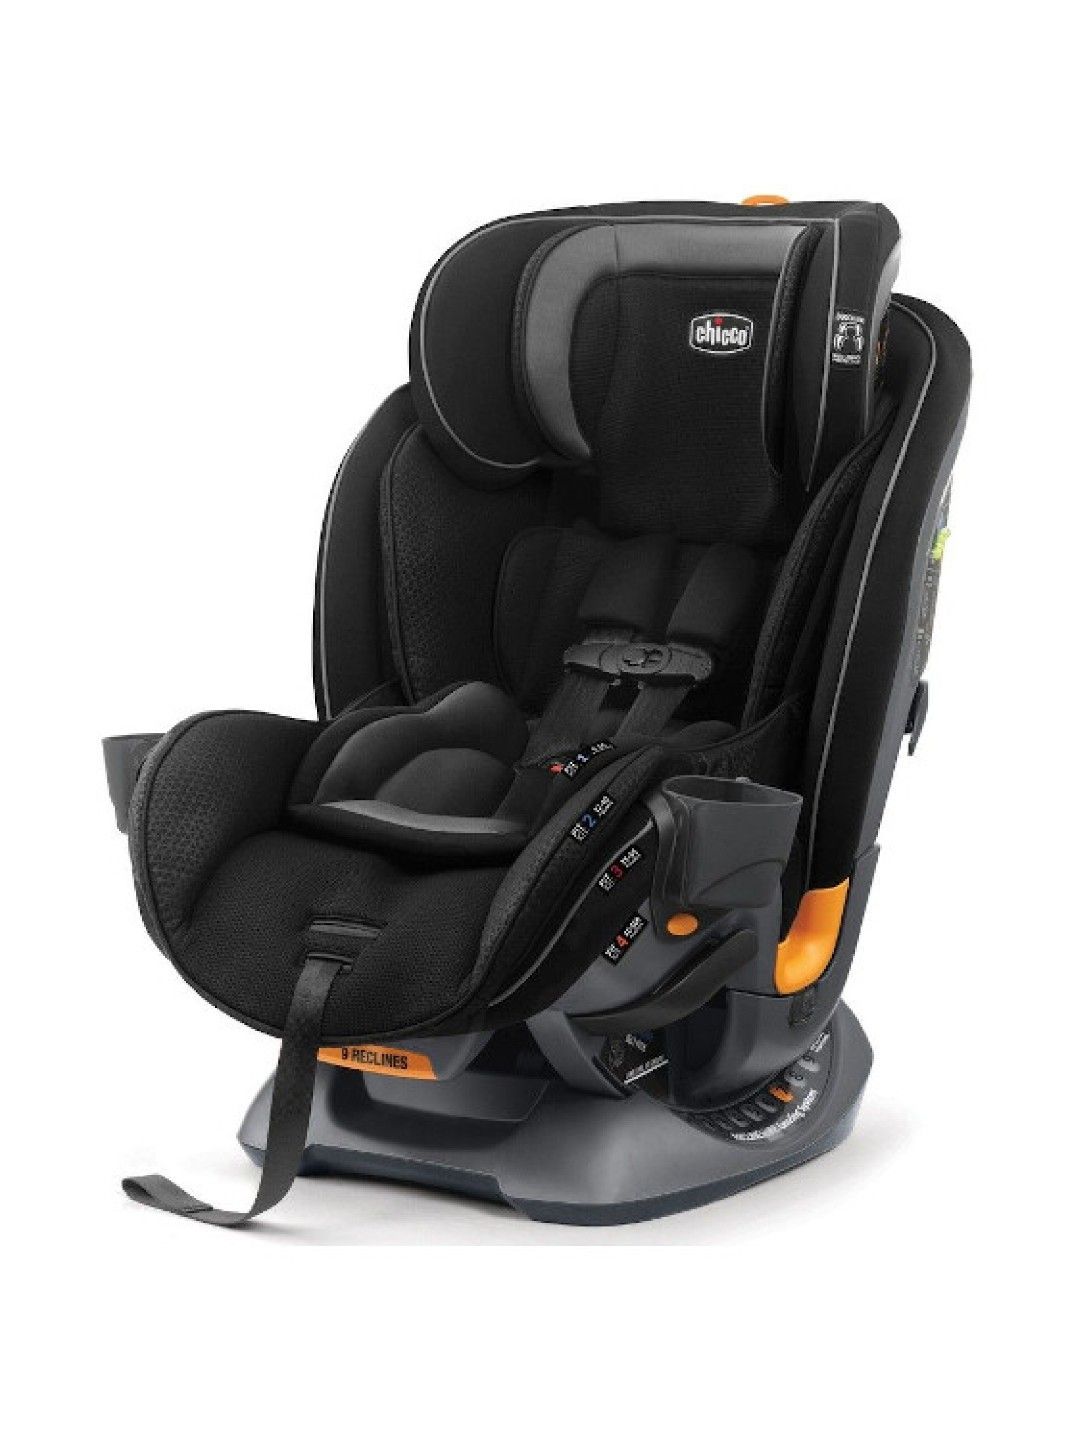 Chicco Fit4 Car Seat Group 0/1/2/3 (Element)